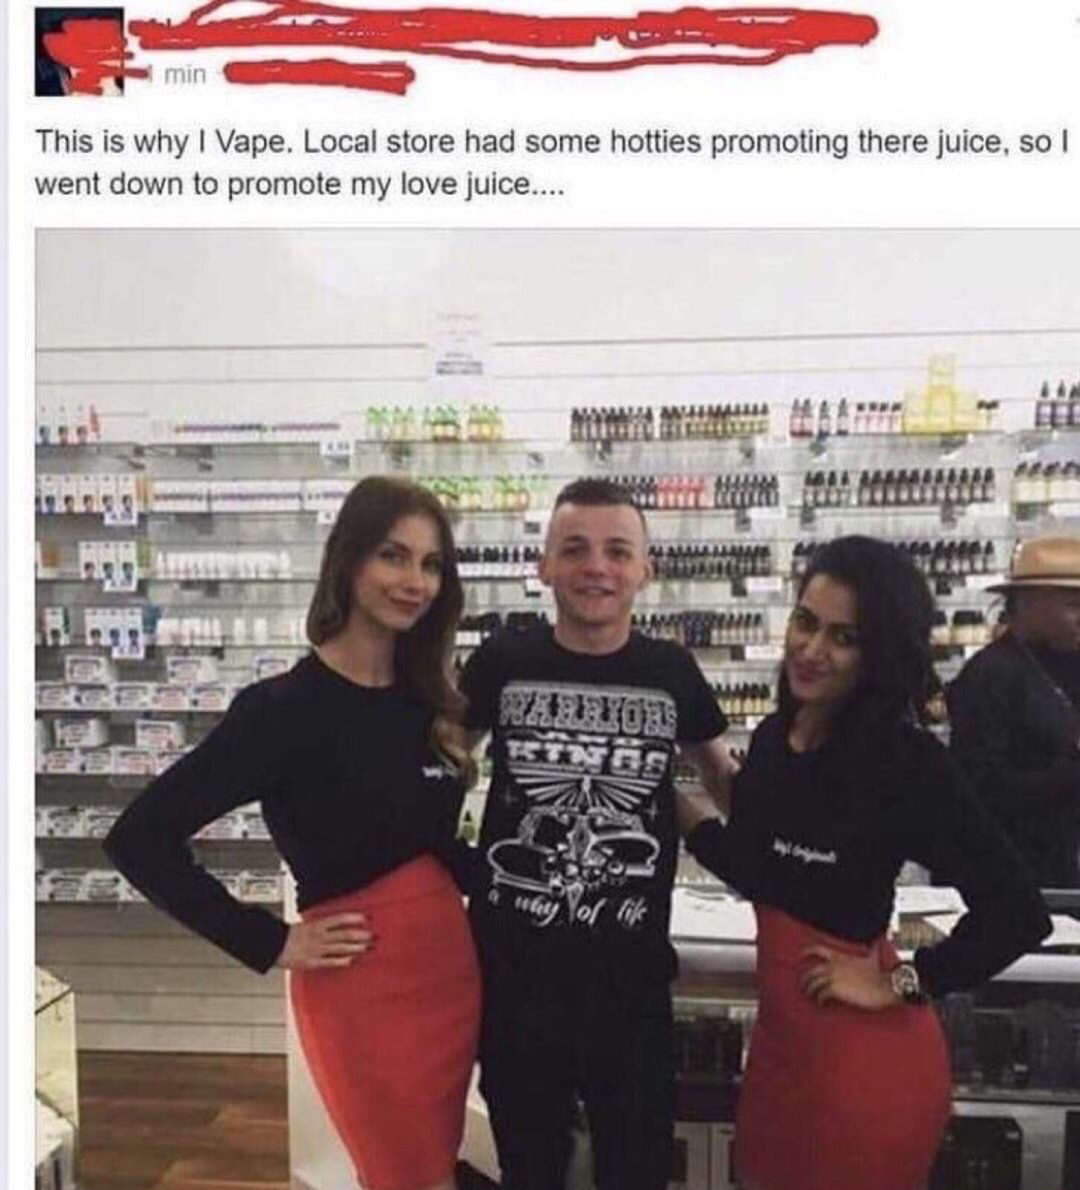 neckbeard things - min This is why I Vape. Local store had some hotties promoting there juice, so I went down to promote my love juice.... Was Mor Kes